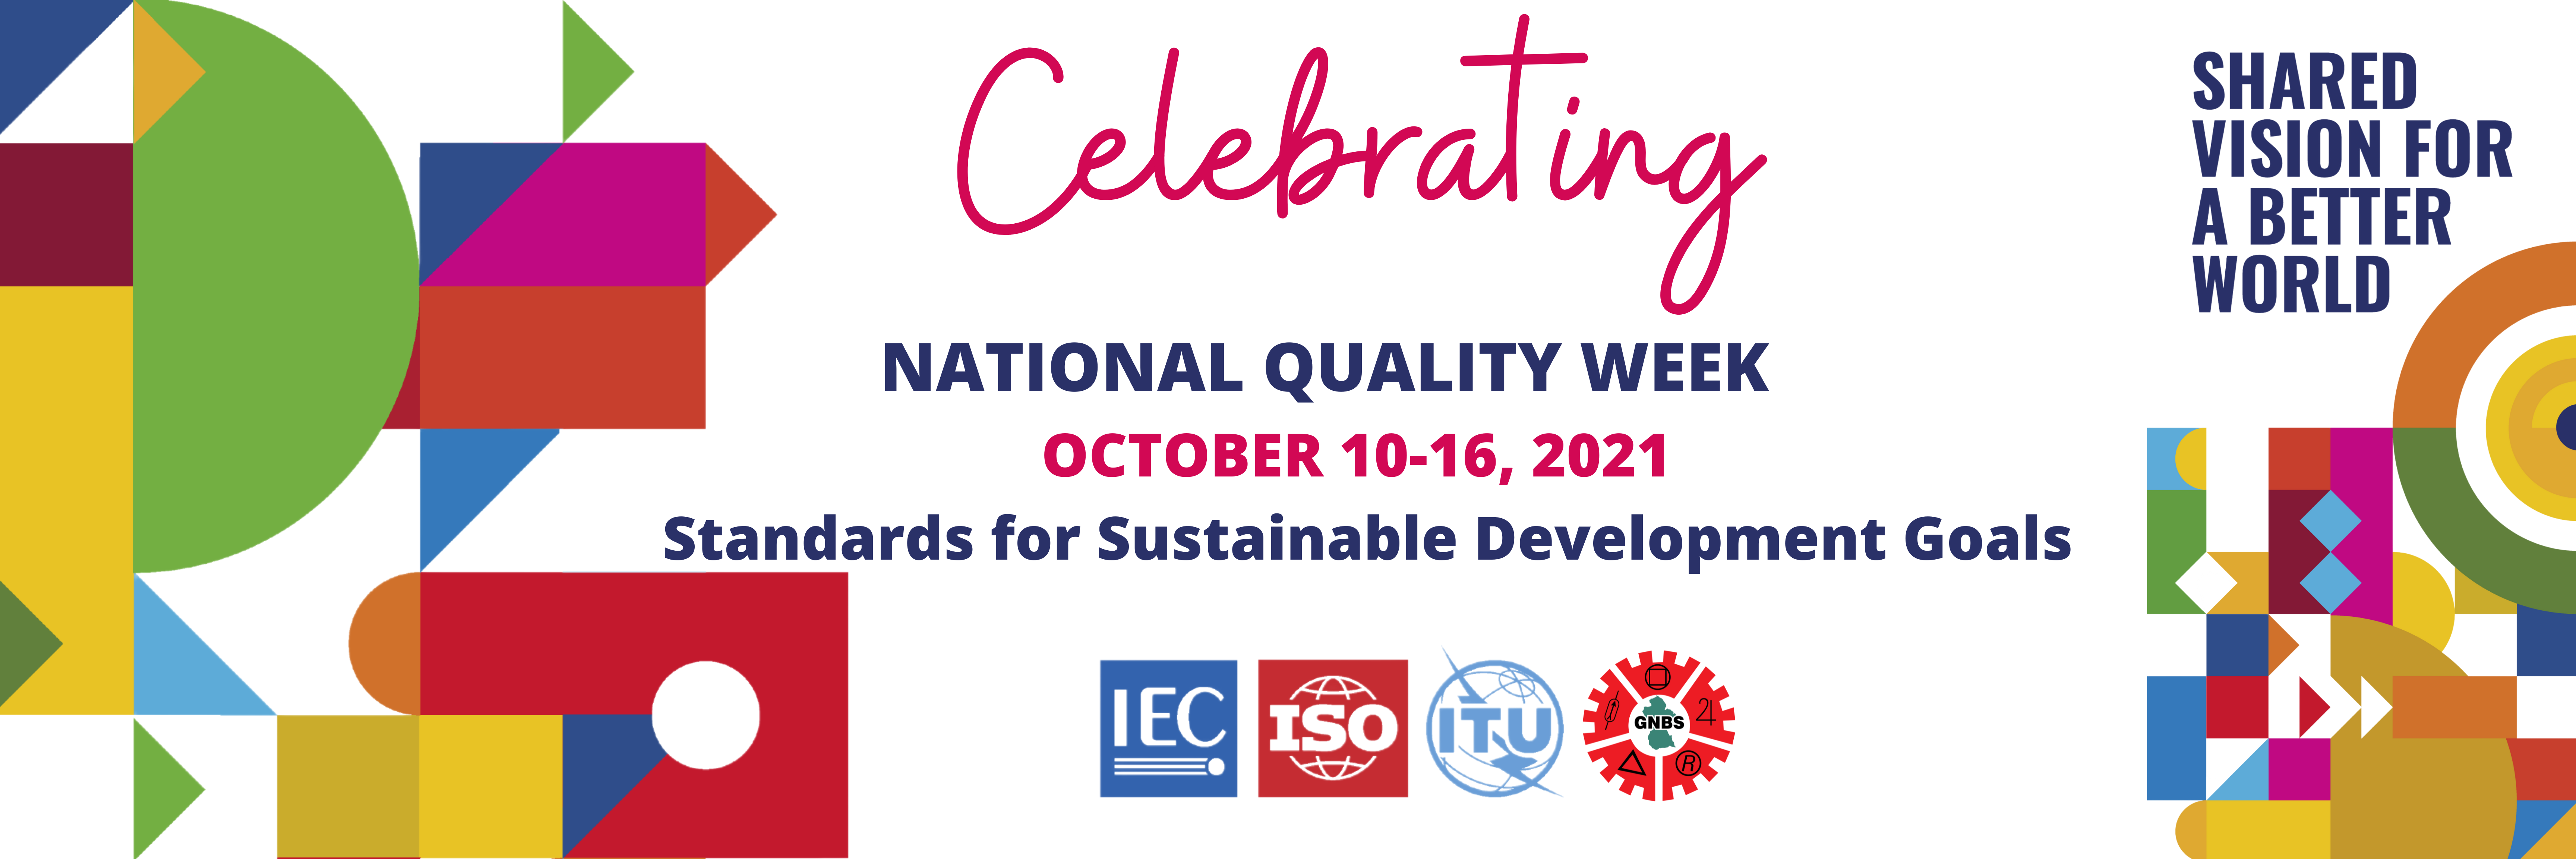 GNBS To Celebrate National Quality Week, 2021 - GNBS